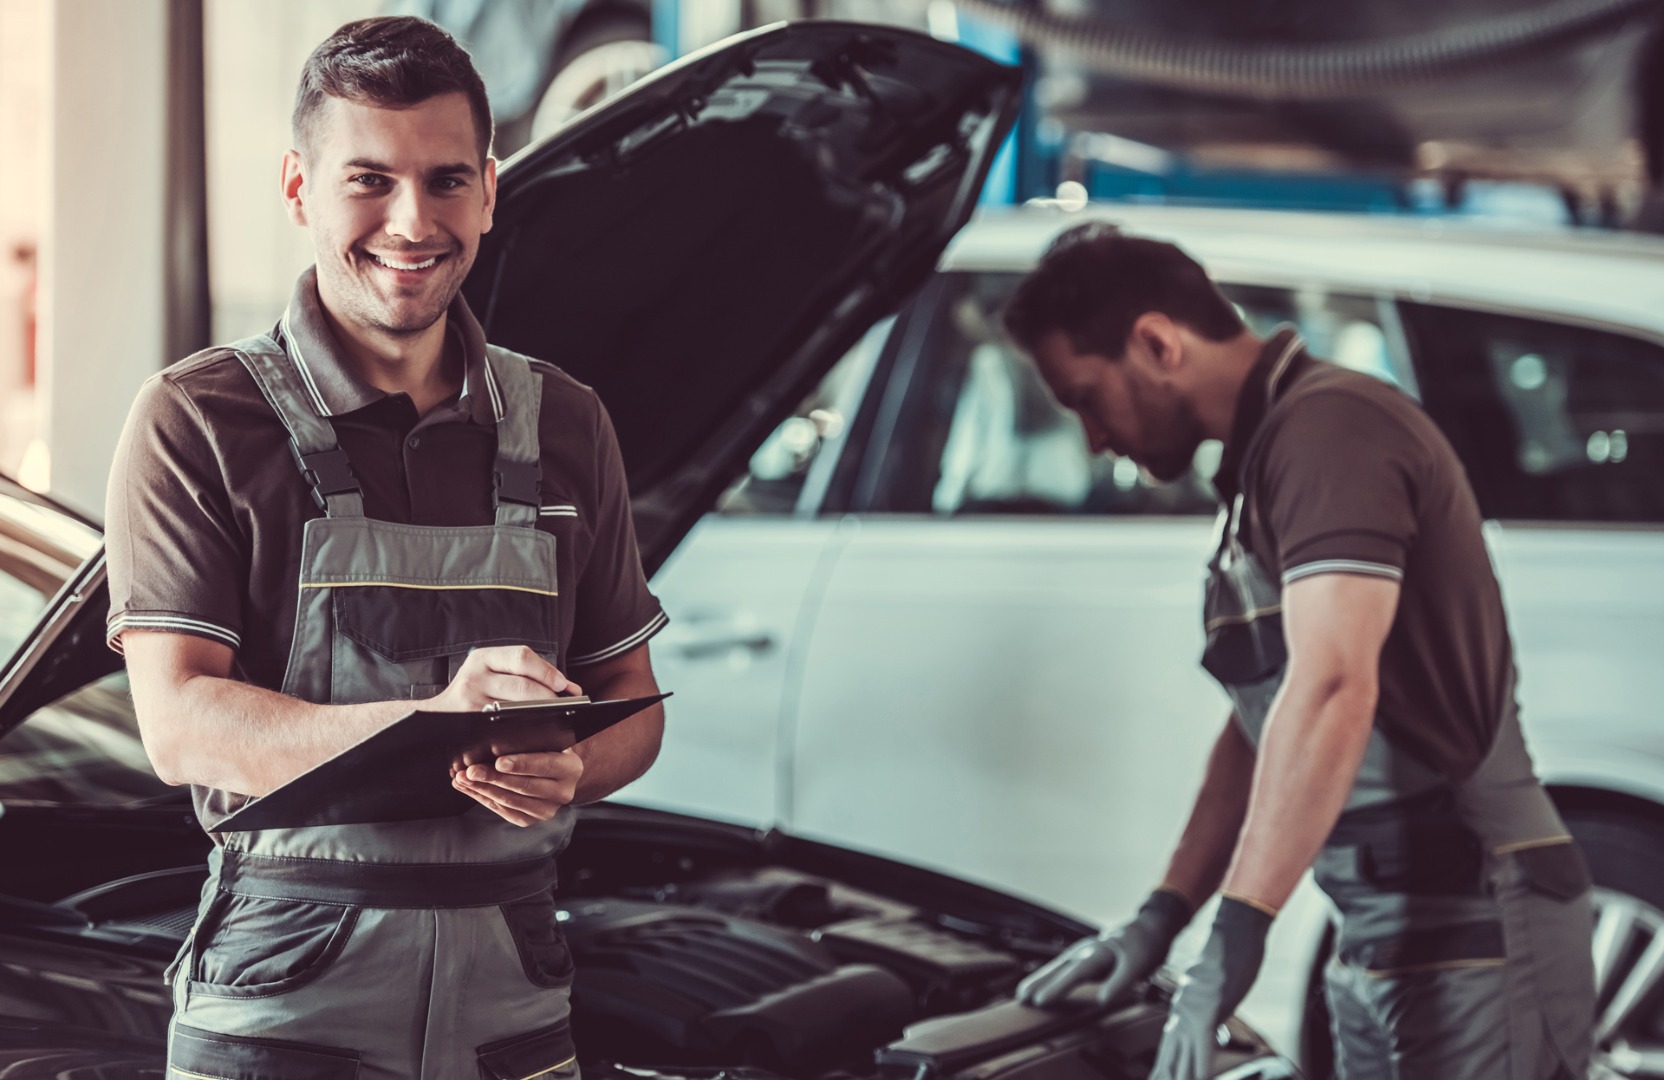 Mechanics working on a vehicle - MOT and Servicing Parkgate, Rotherham